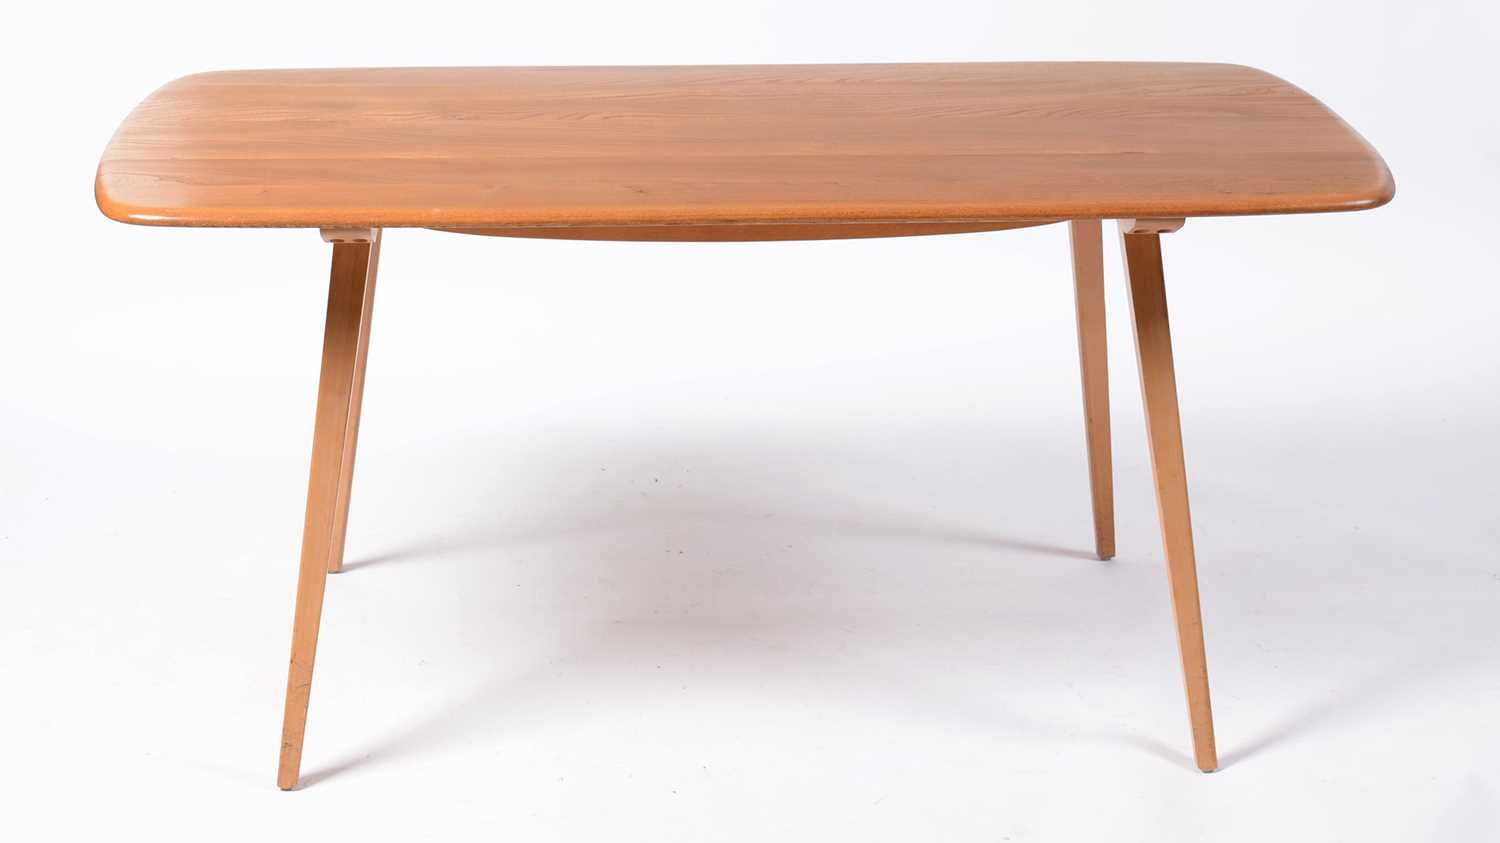 Lot 86 - Ercol - Lucian Ercolani - Plank - Model 382 - retro vintage beech and elm dining table